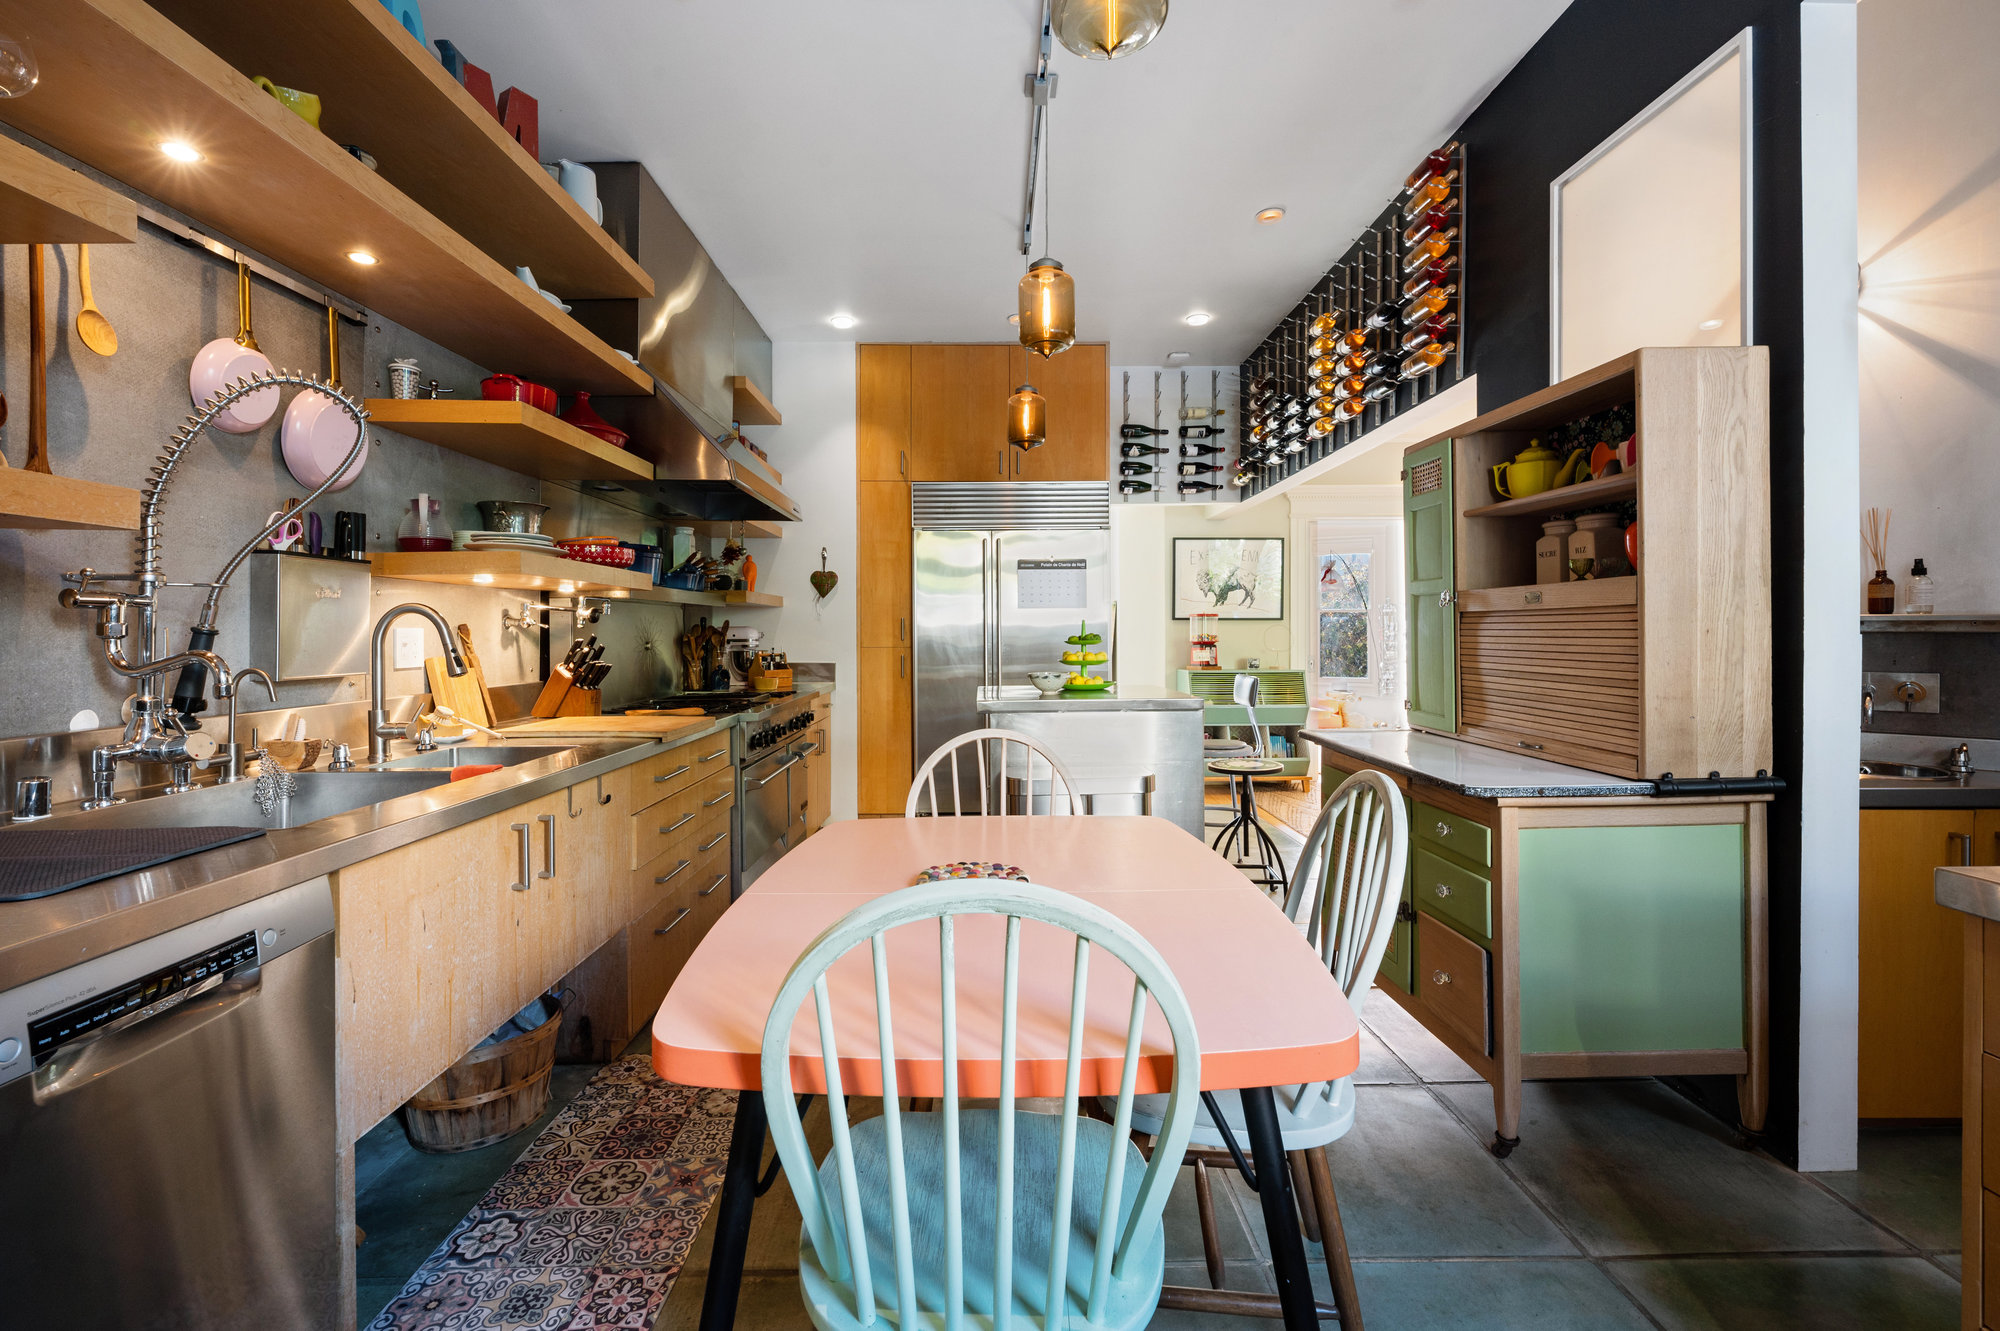 Property Photo: Kitchen with open shelving, pendant lights and an eat-in dining area